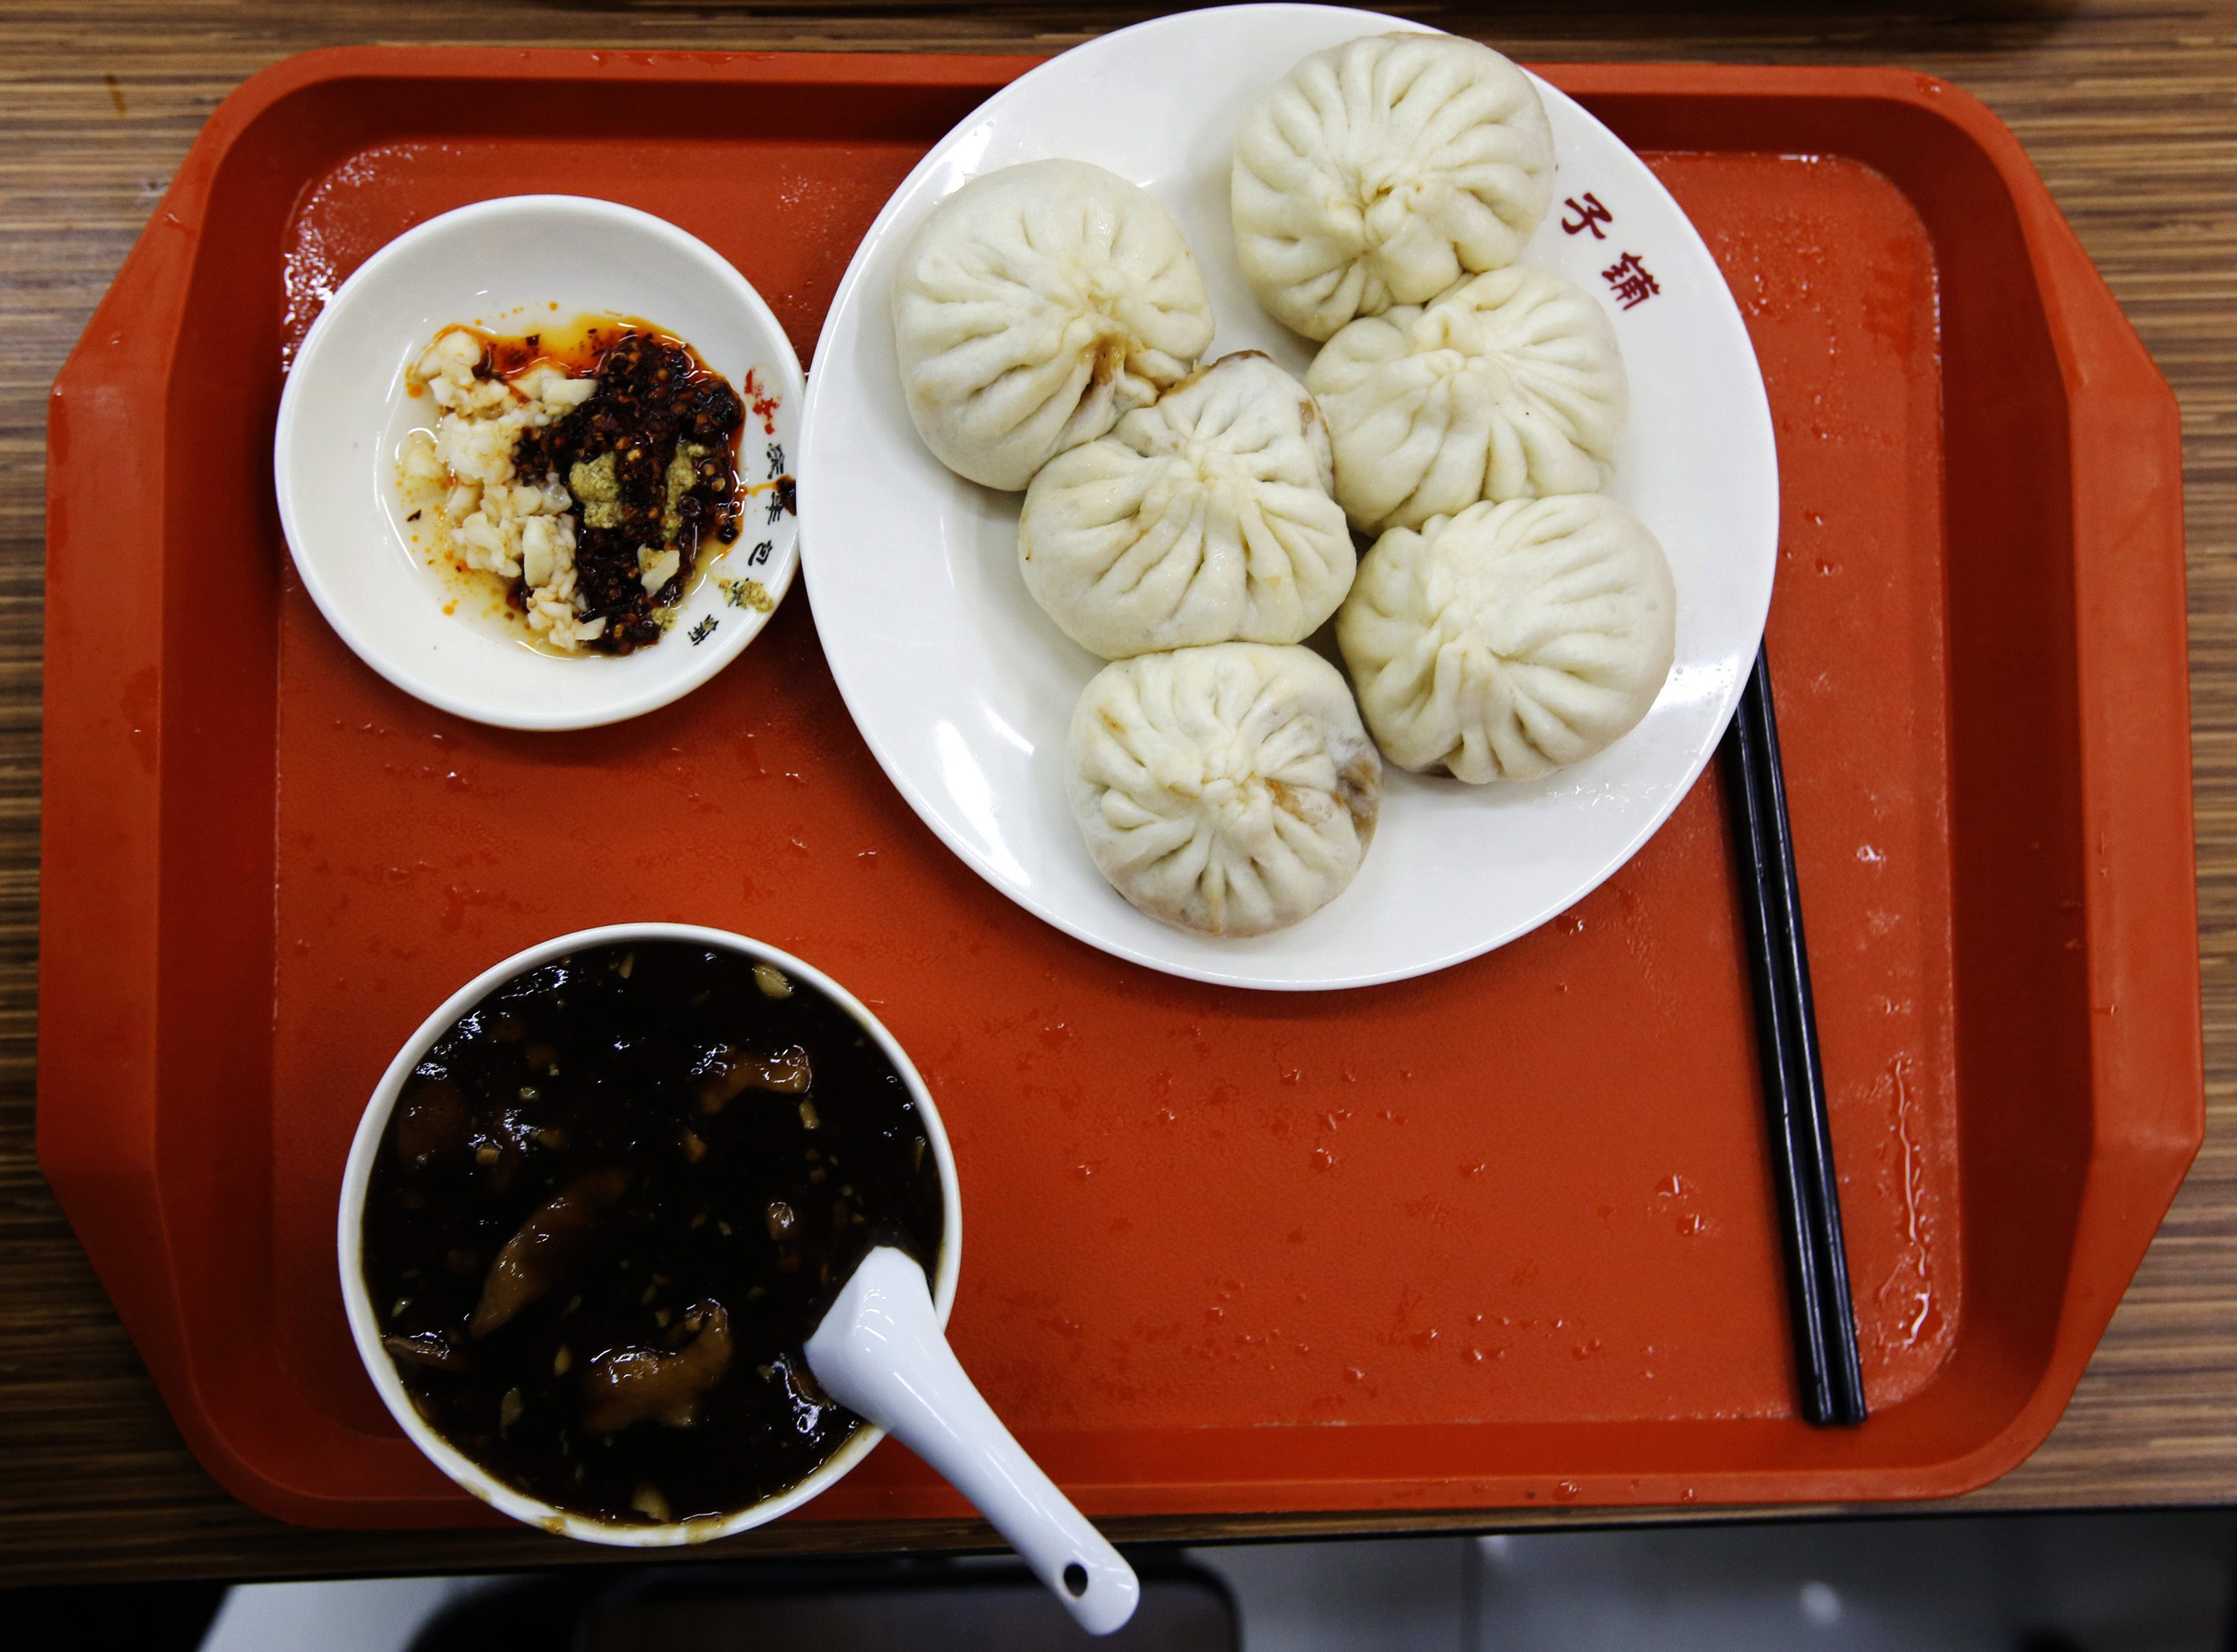 A serving of food at a Qingfeng chain restaurant in Beijing similar to what Chinese President Xi Jinping ate when he visited on Saturday, is pictured at the Qingfeng steamed buns restaurant in Beijing. Photo: Reuters